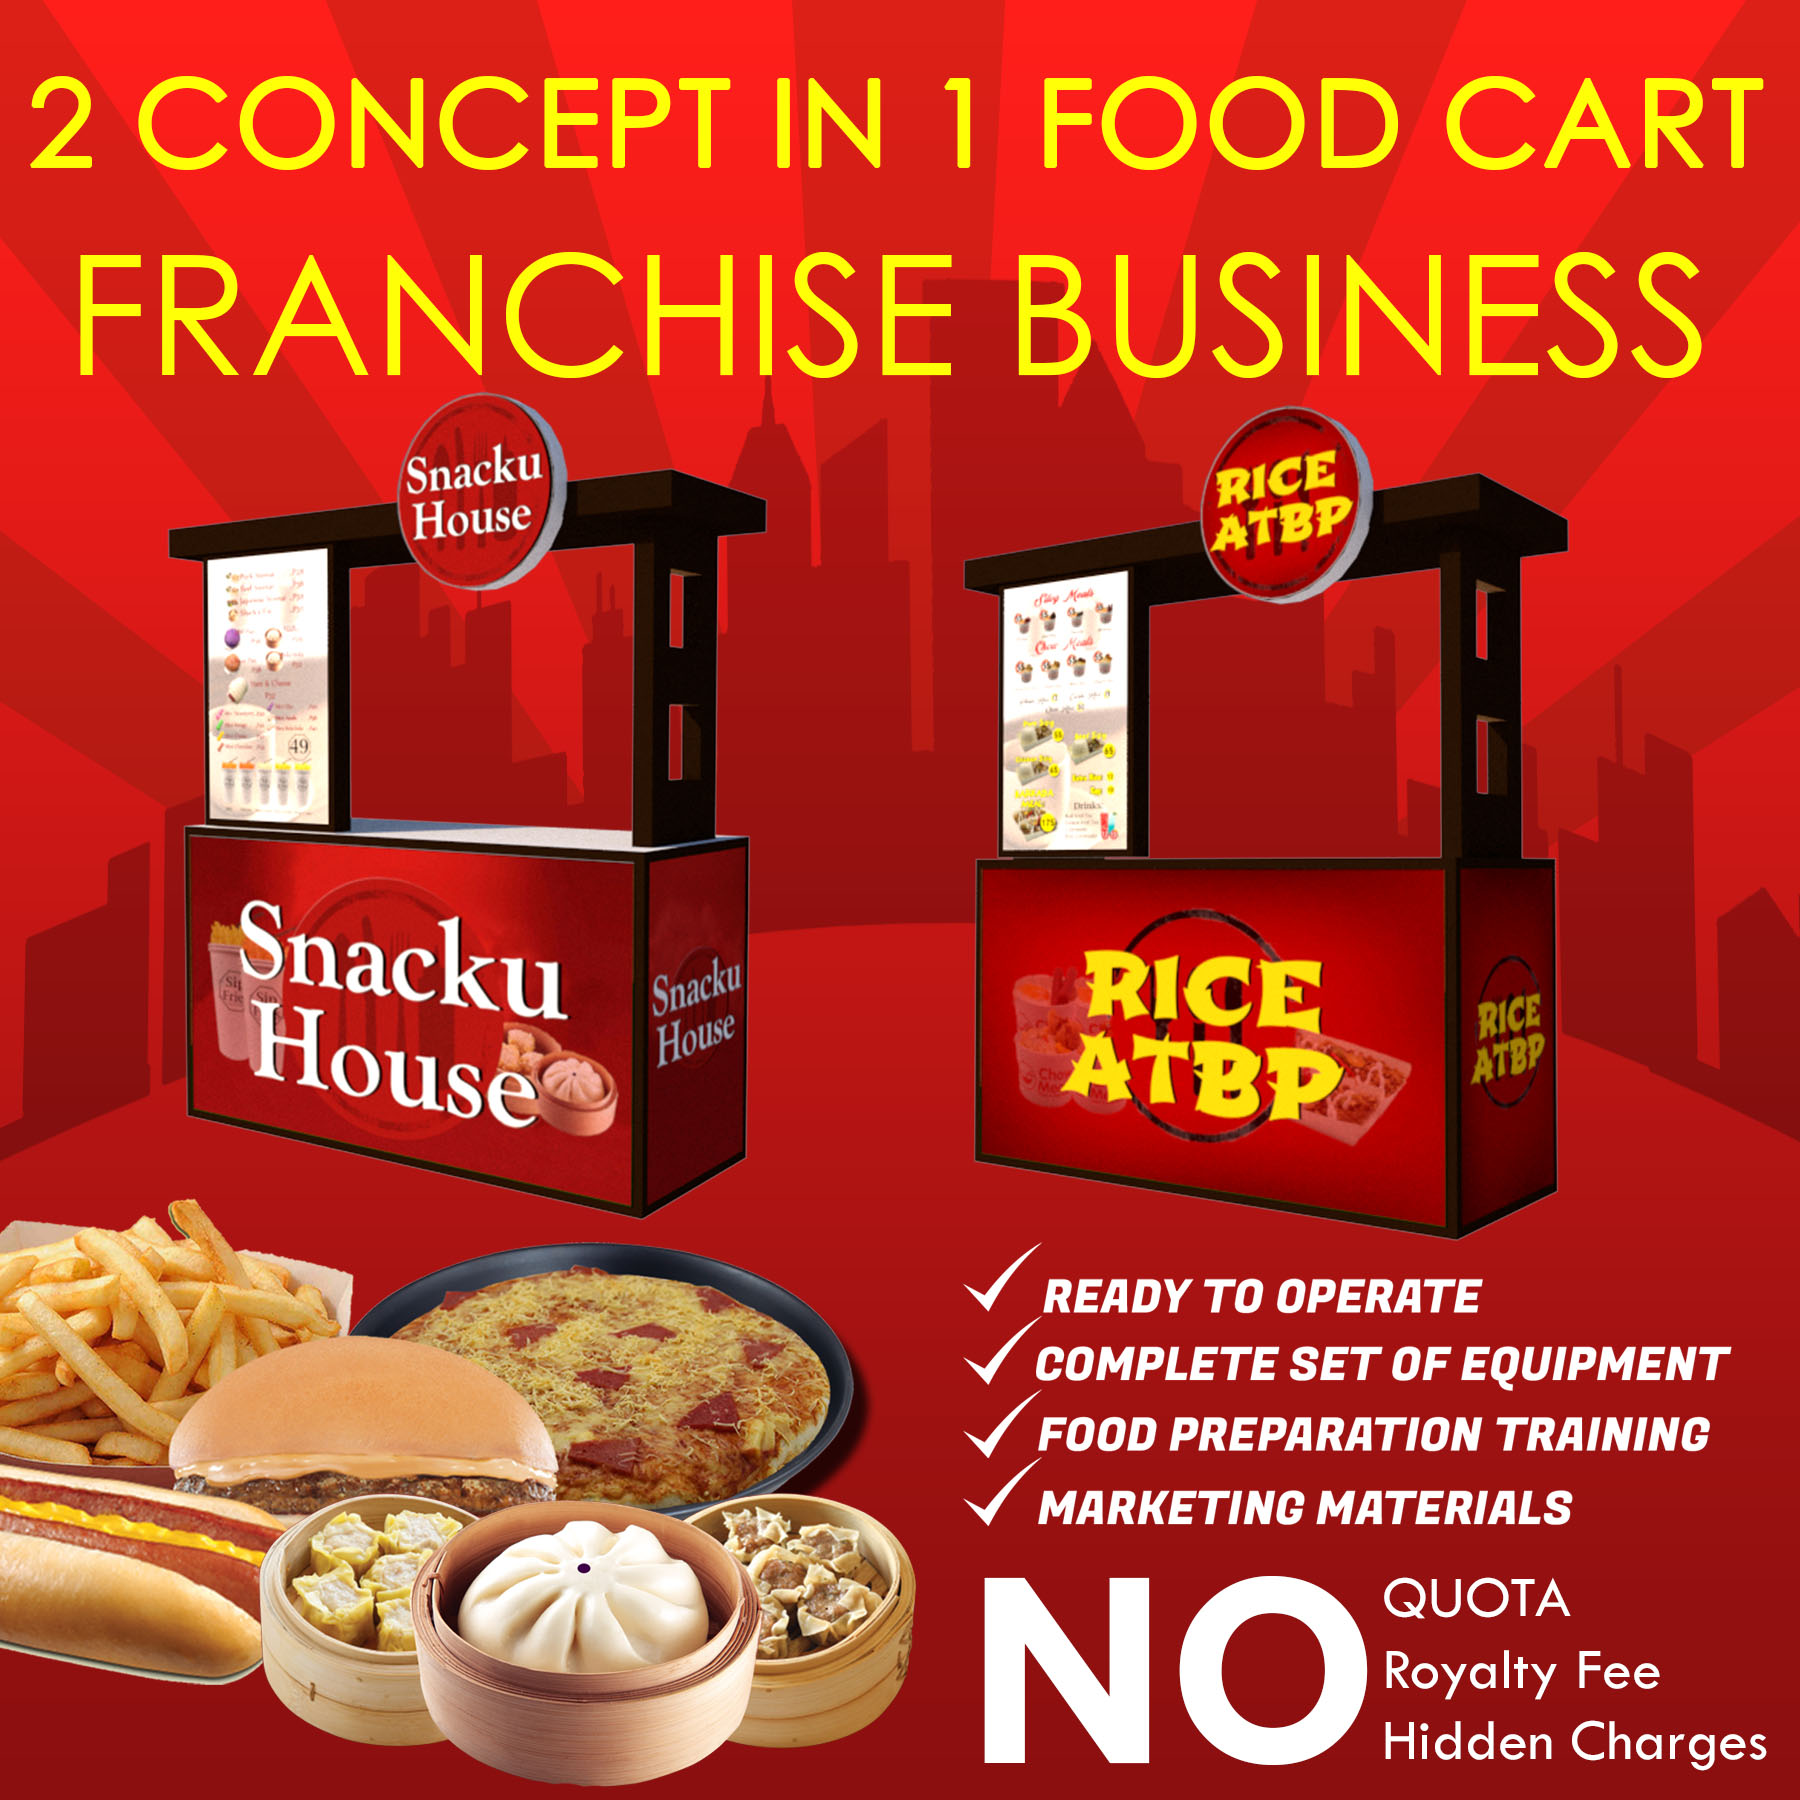 snack house business plan pdf